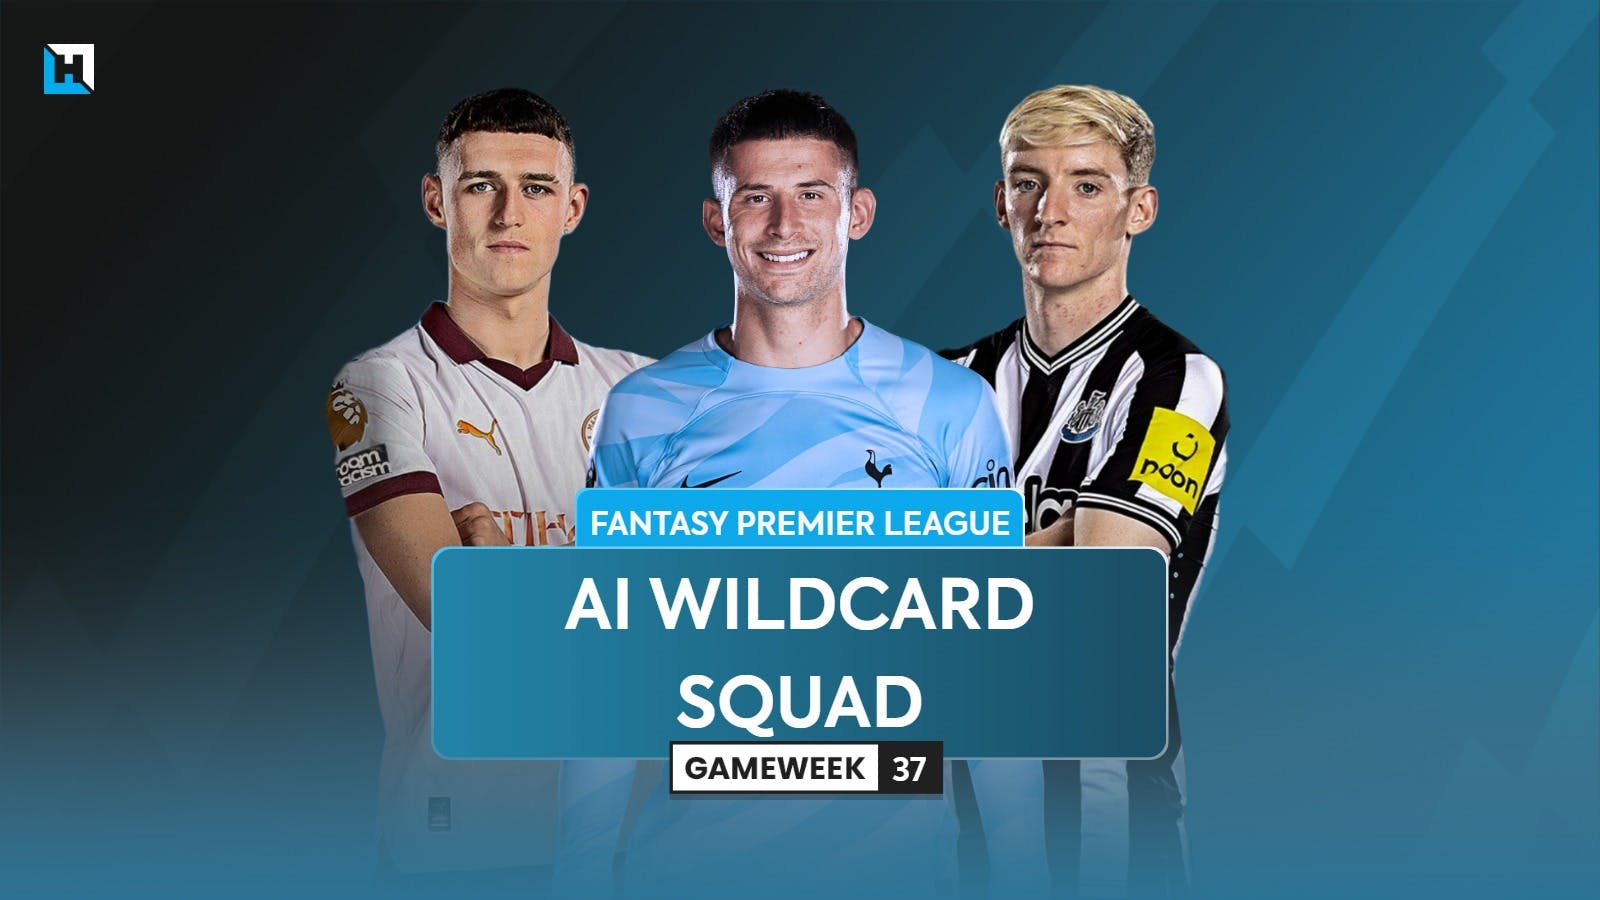 The best FPL Wildcard team for Gameweek 37 according to AI